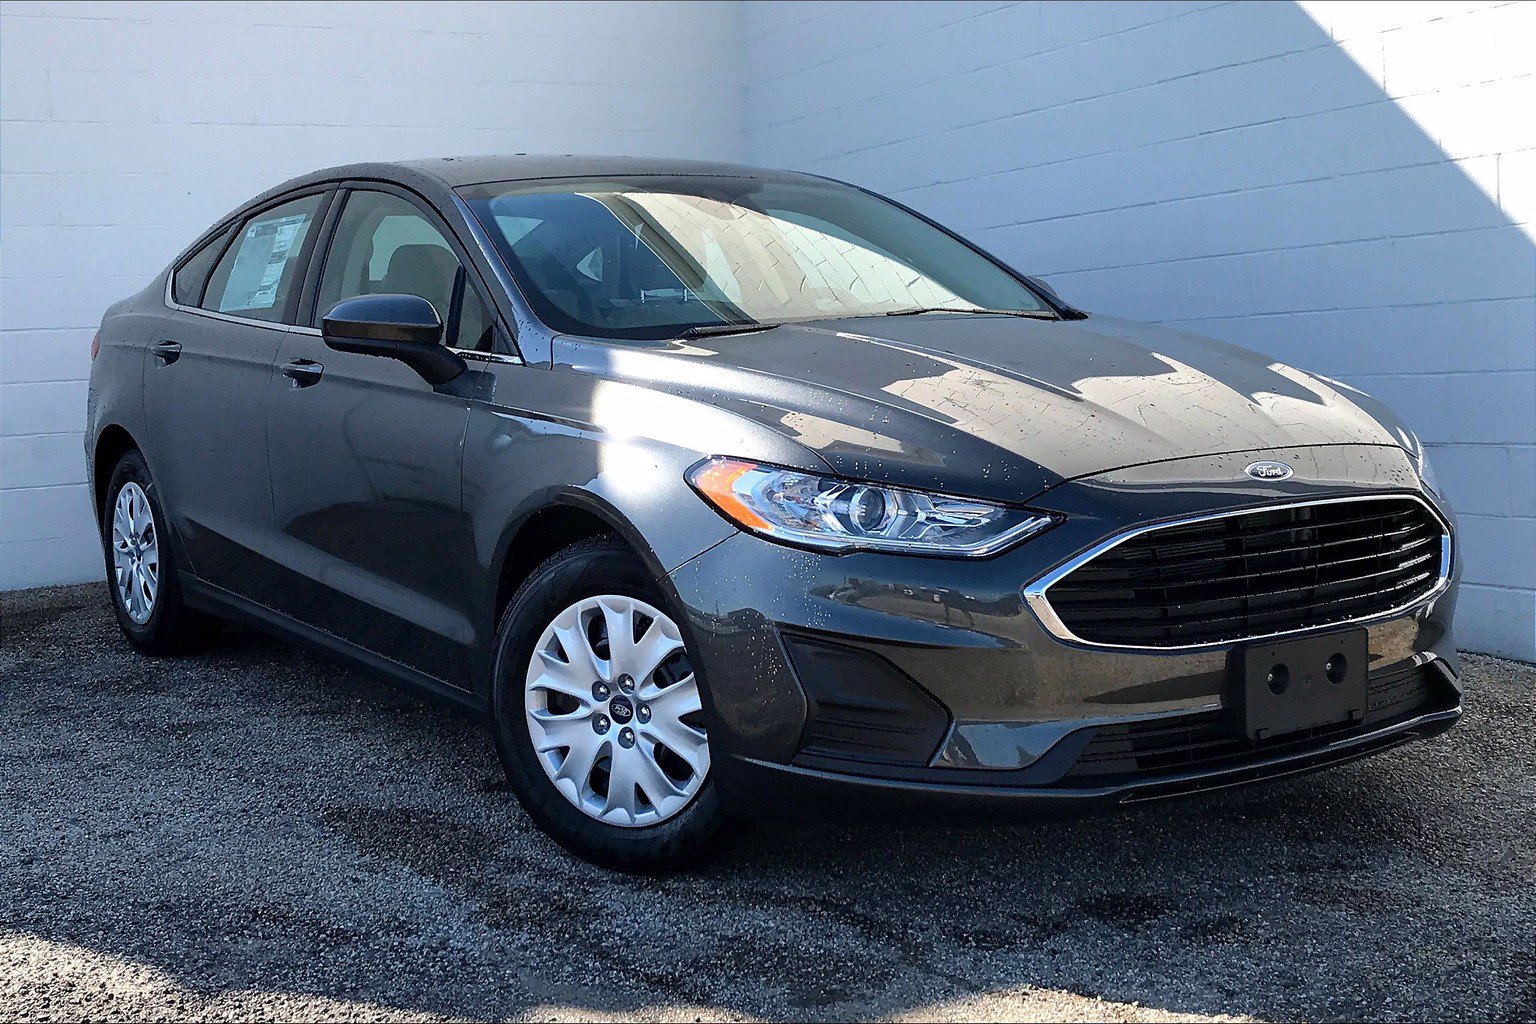 New 2020 Ford Fusion S 4D Sedan in Morton #233153 | Mike Murphy Ford